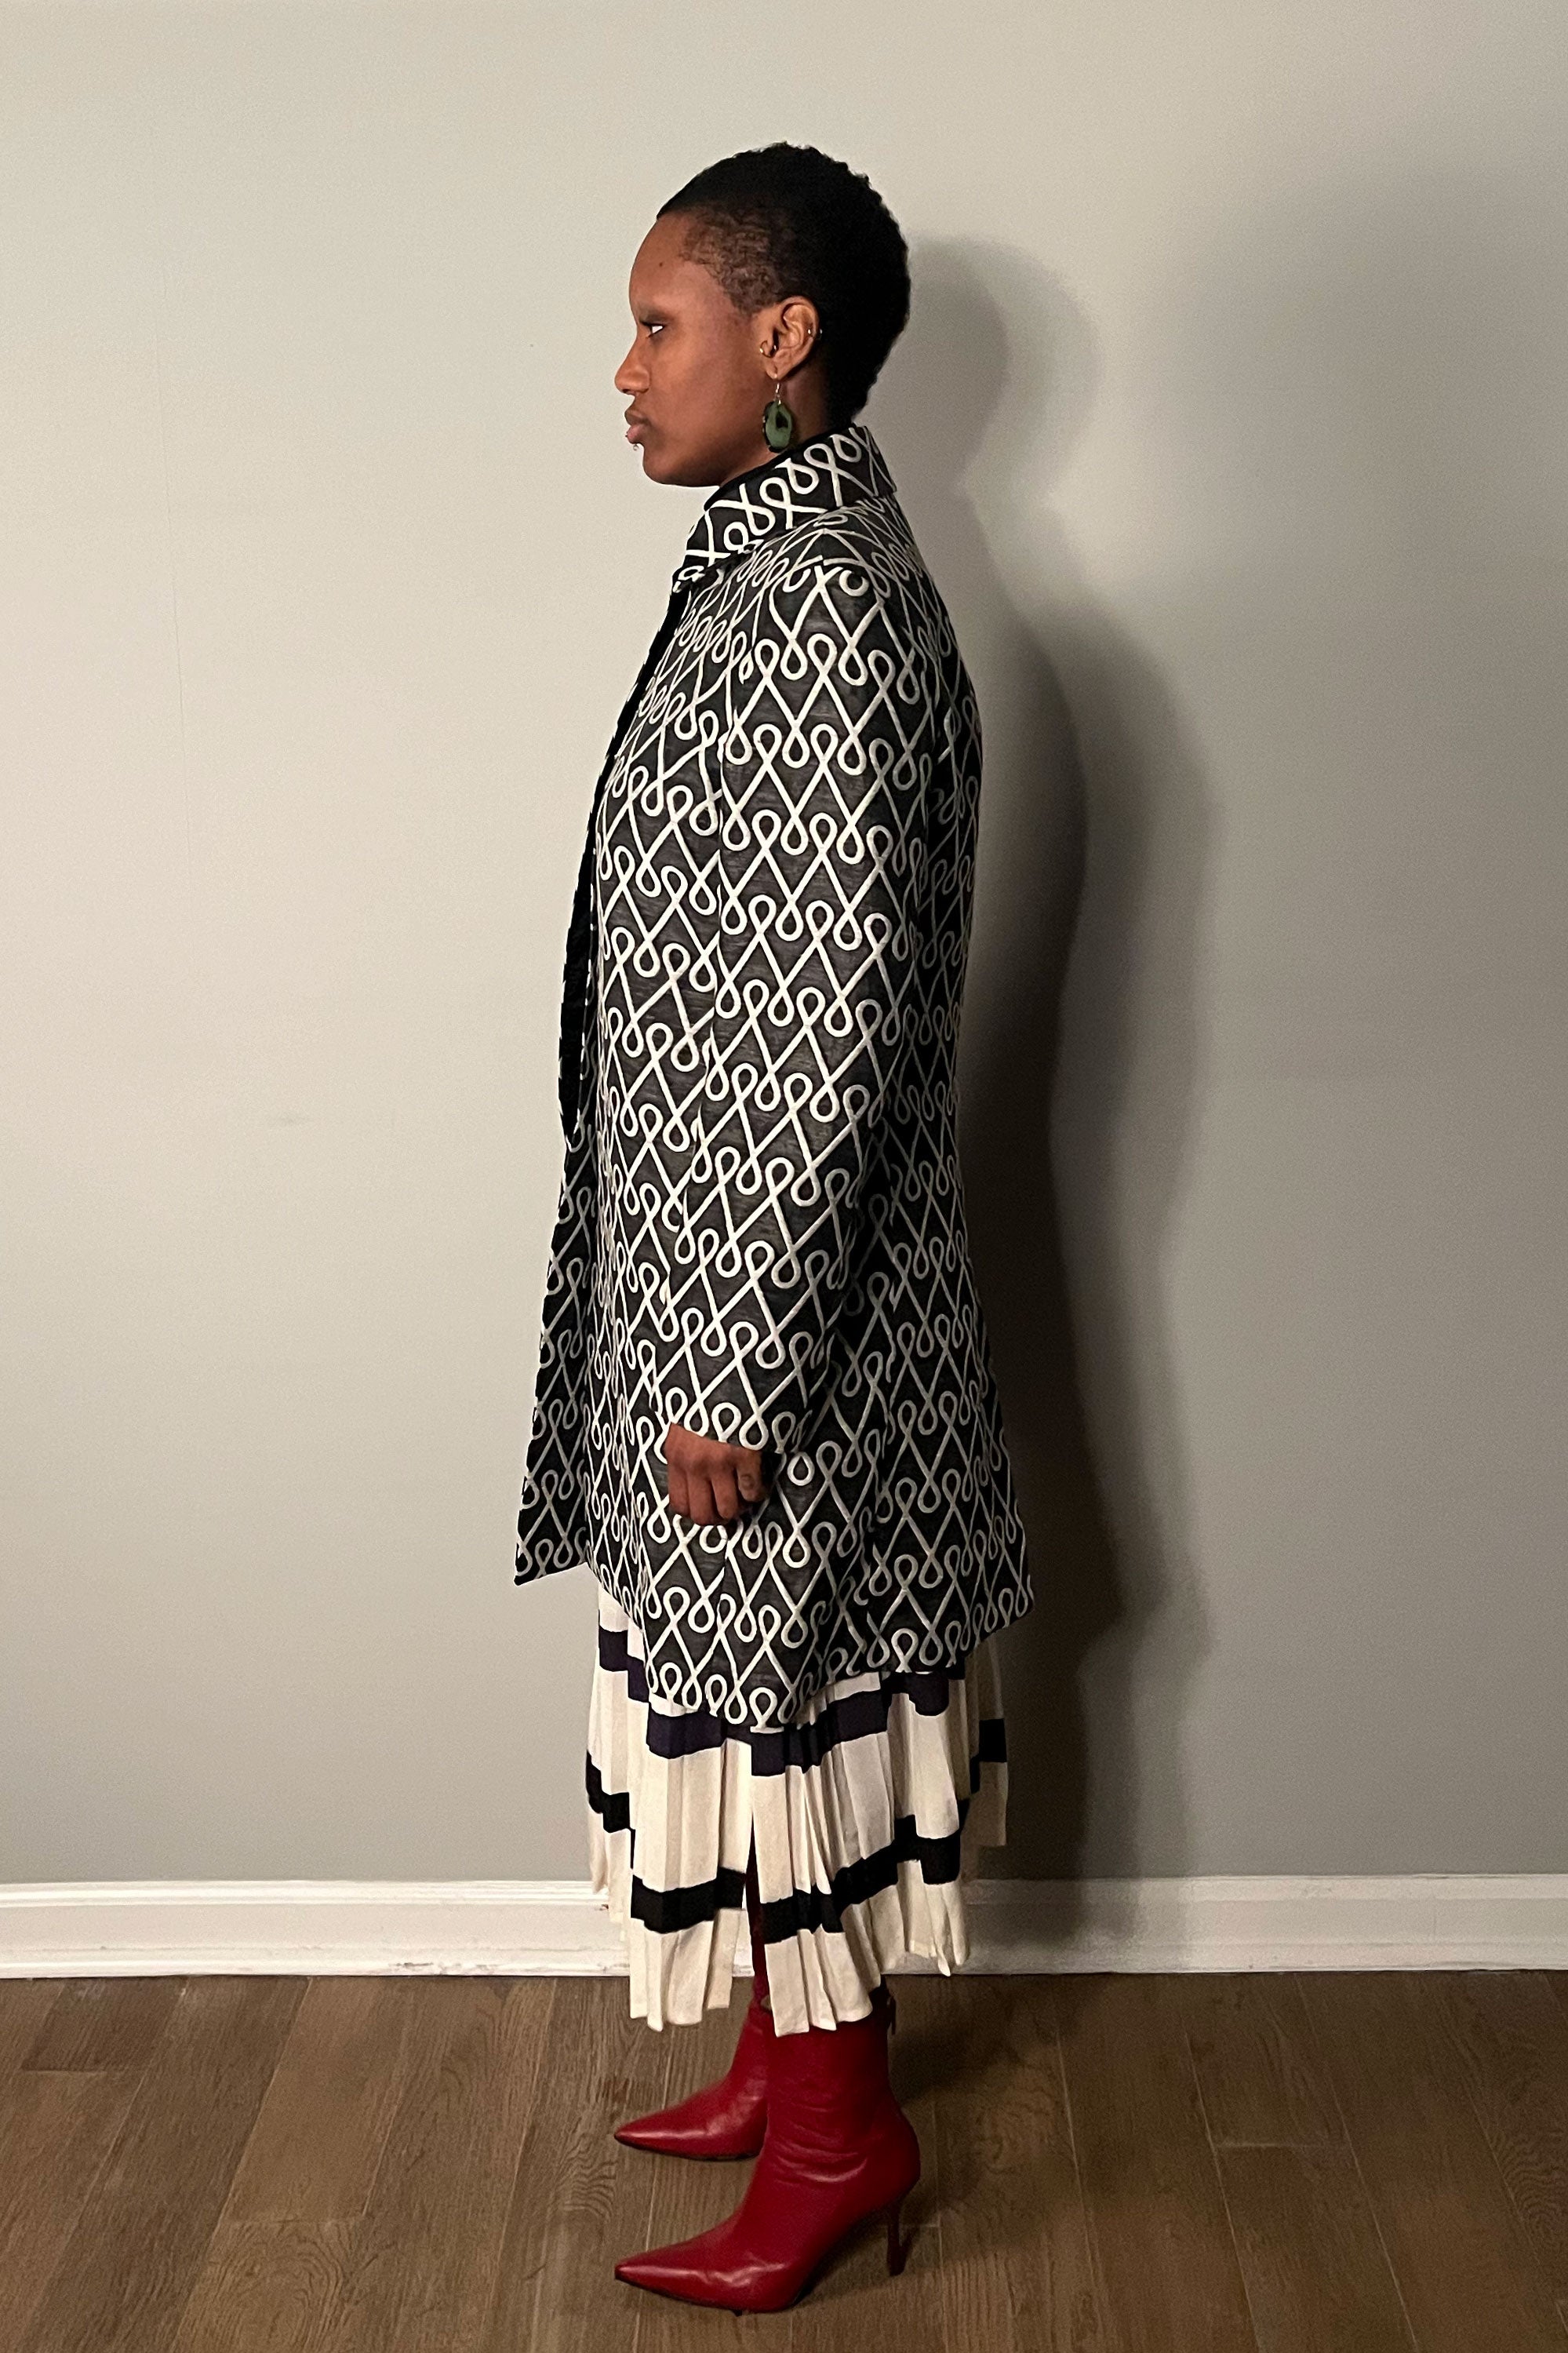 Black and white linen blend jacket by Byblos featuring fabulous repeating woven pattern.